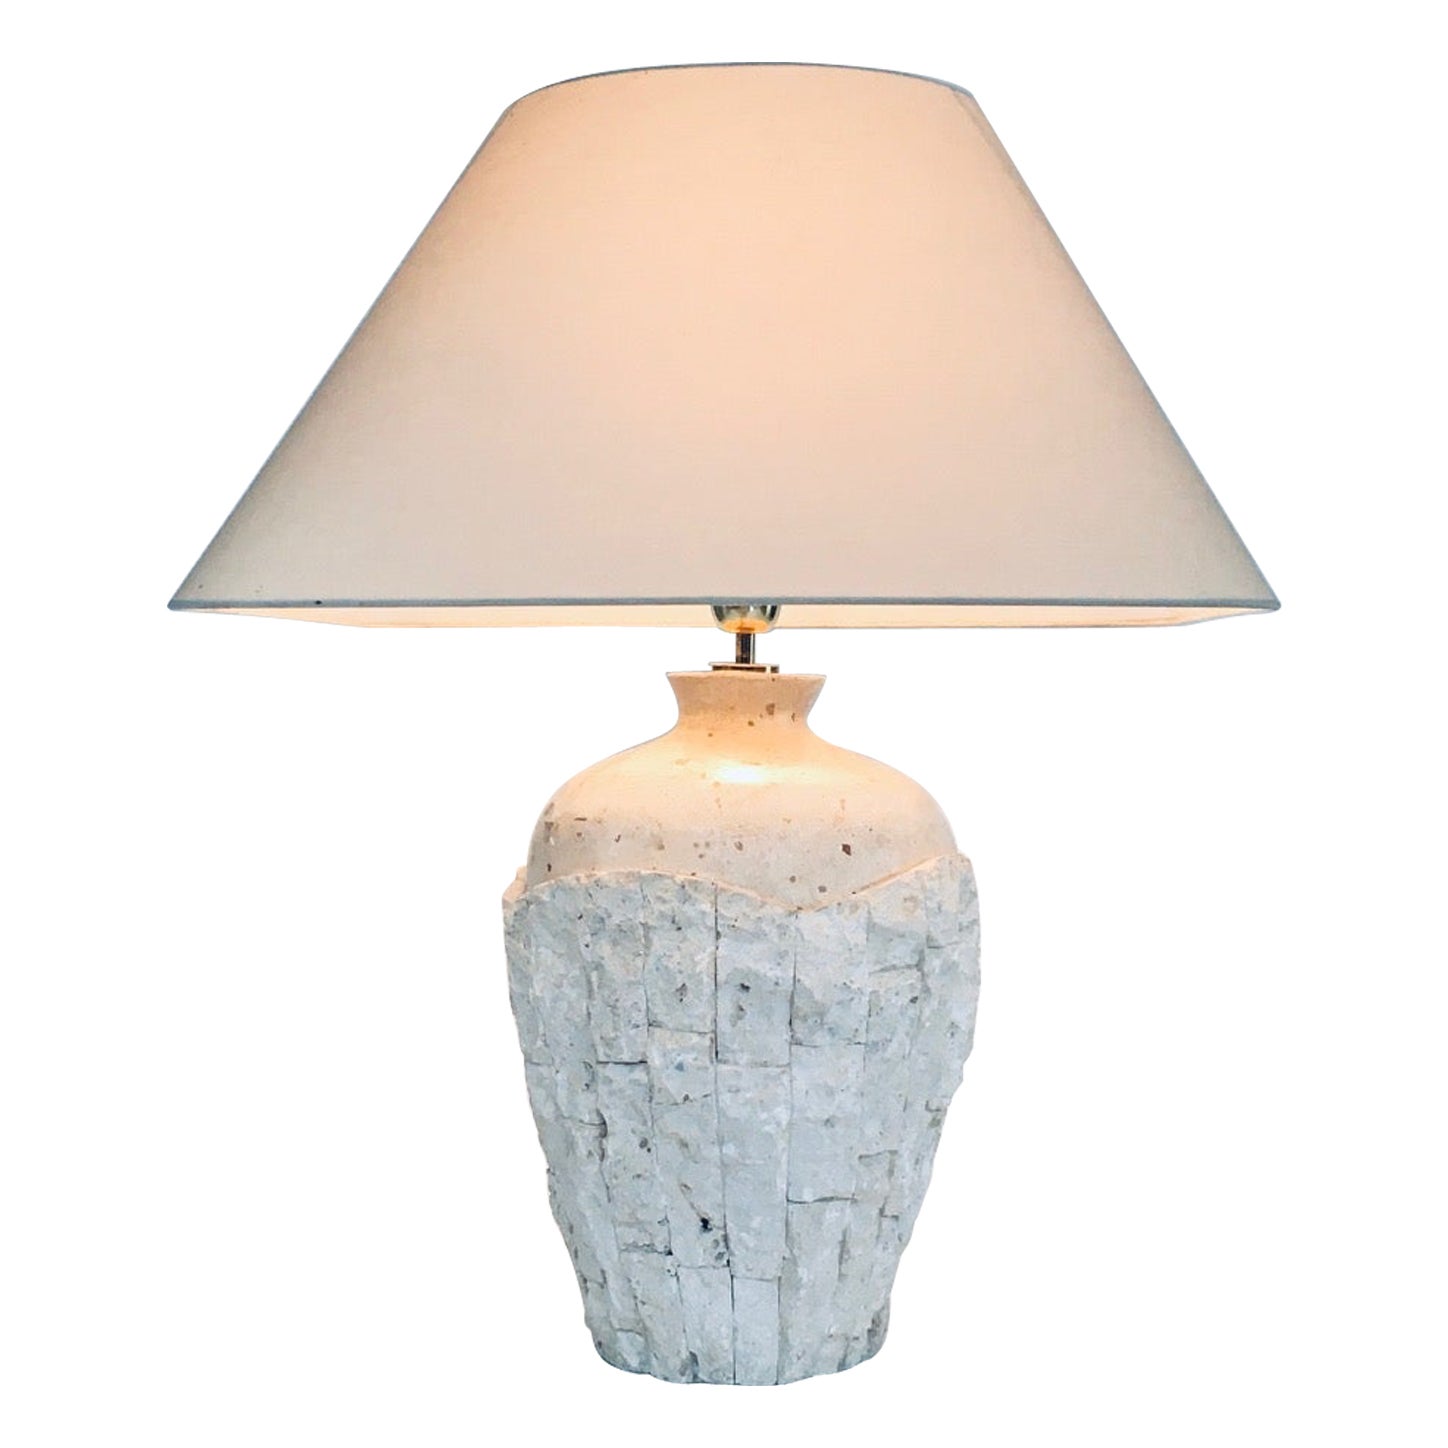 Hollywood Regency Design Mactan Stone Table Lamp Set, 1970's Italy For Sale